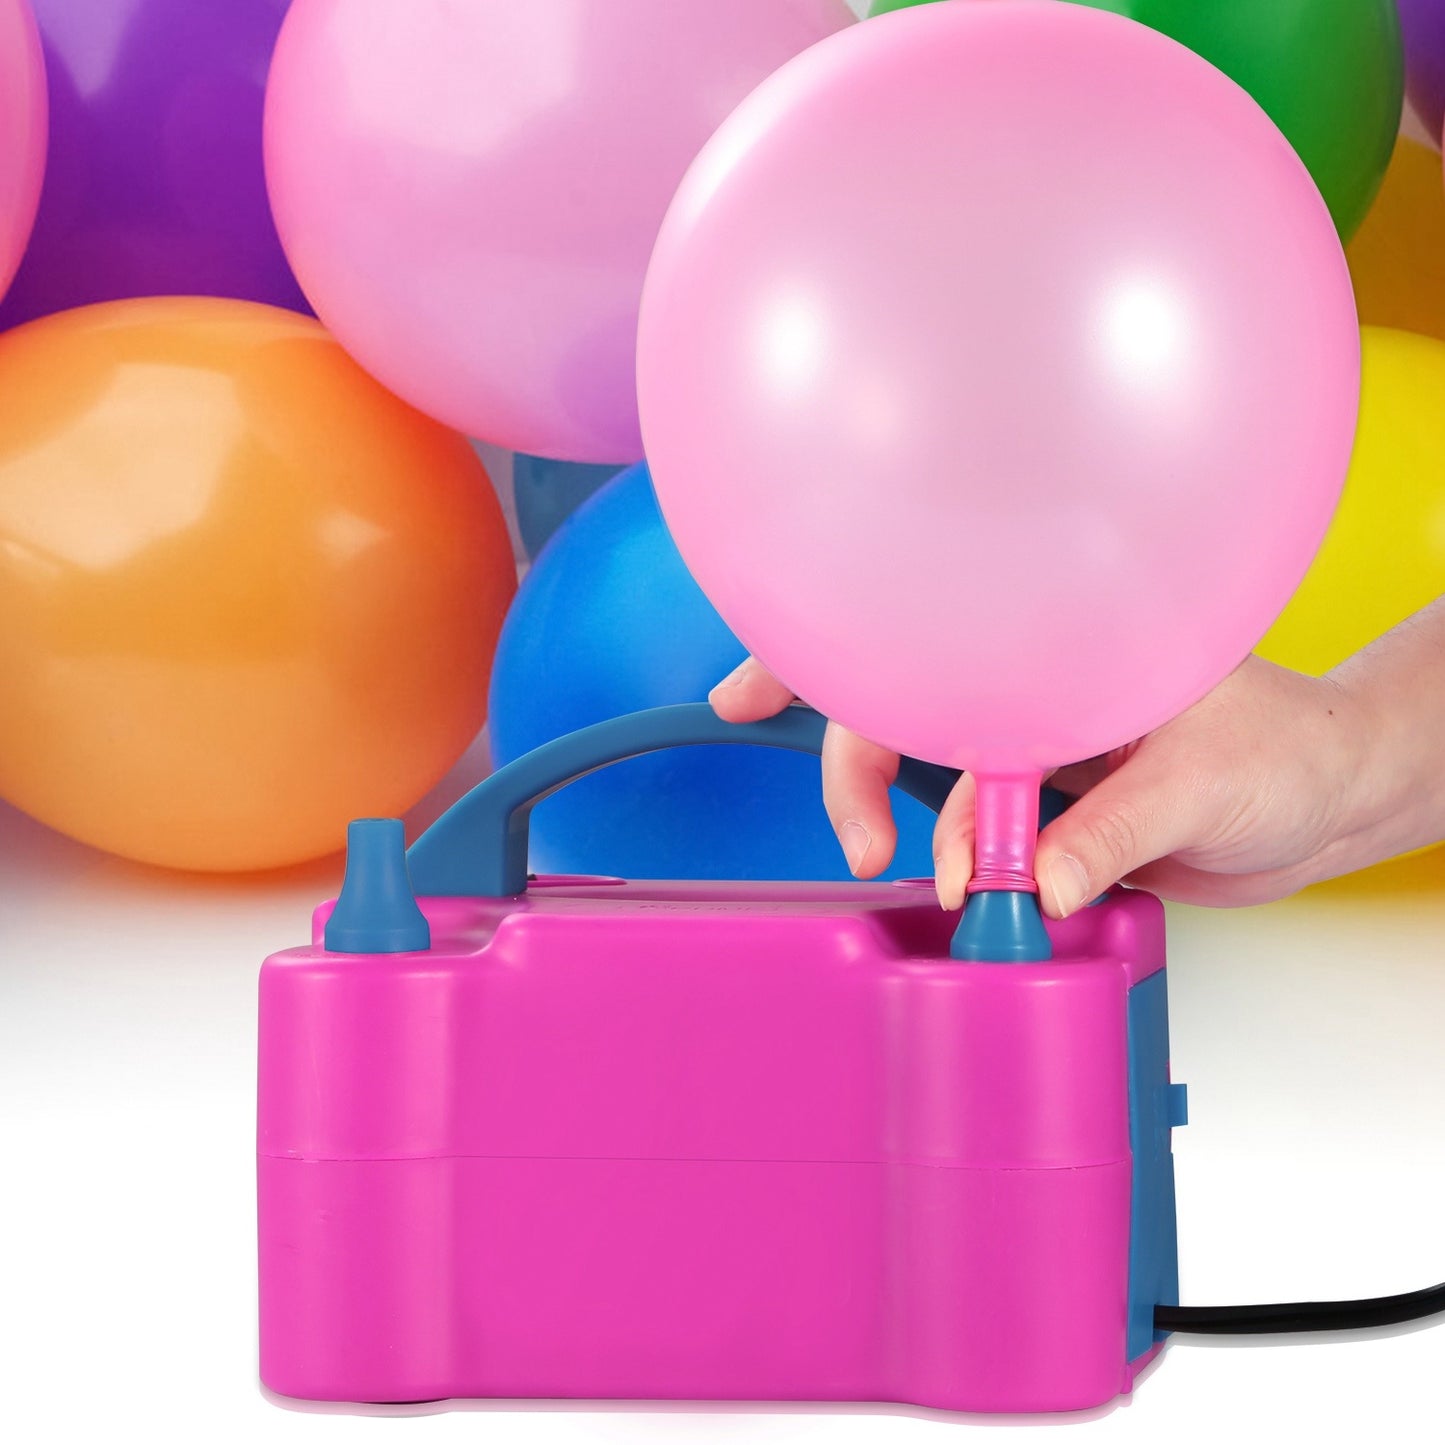 Electric Balloon Pump 600W Balloon Blower Inflator Dual Nozzle for Party Wedding Festival Decoration